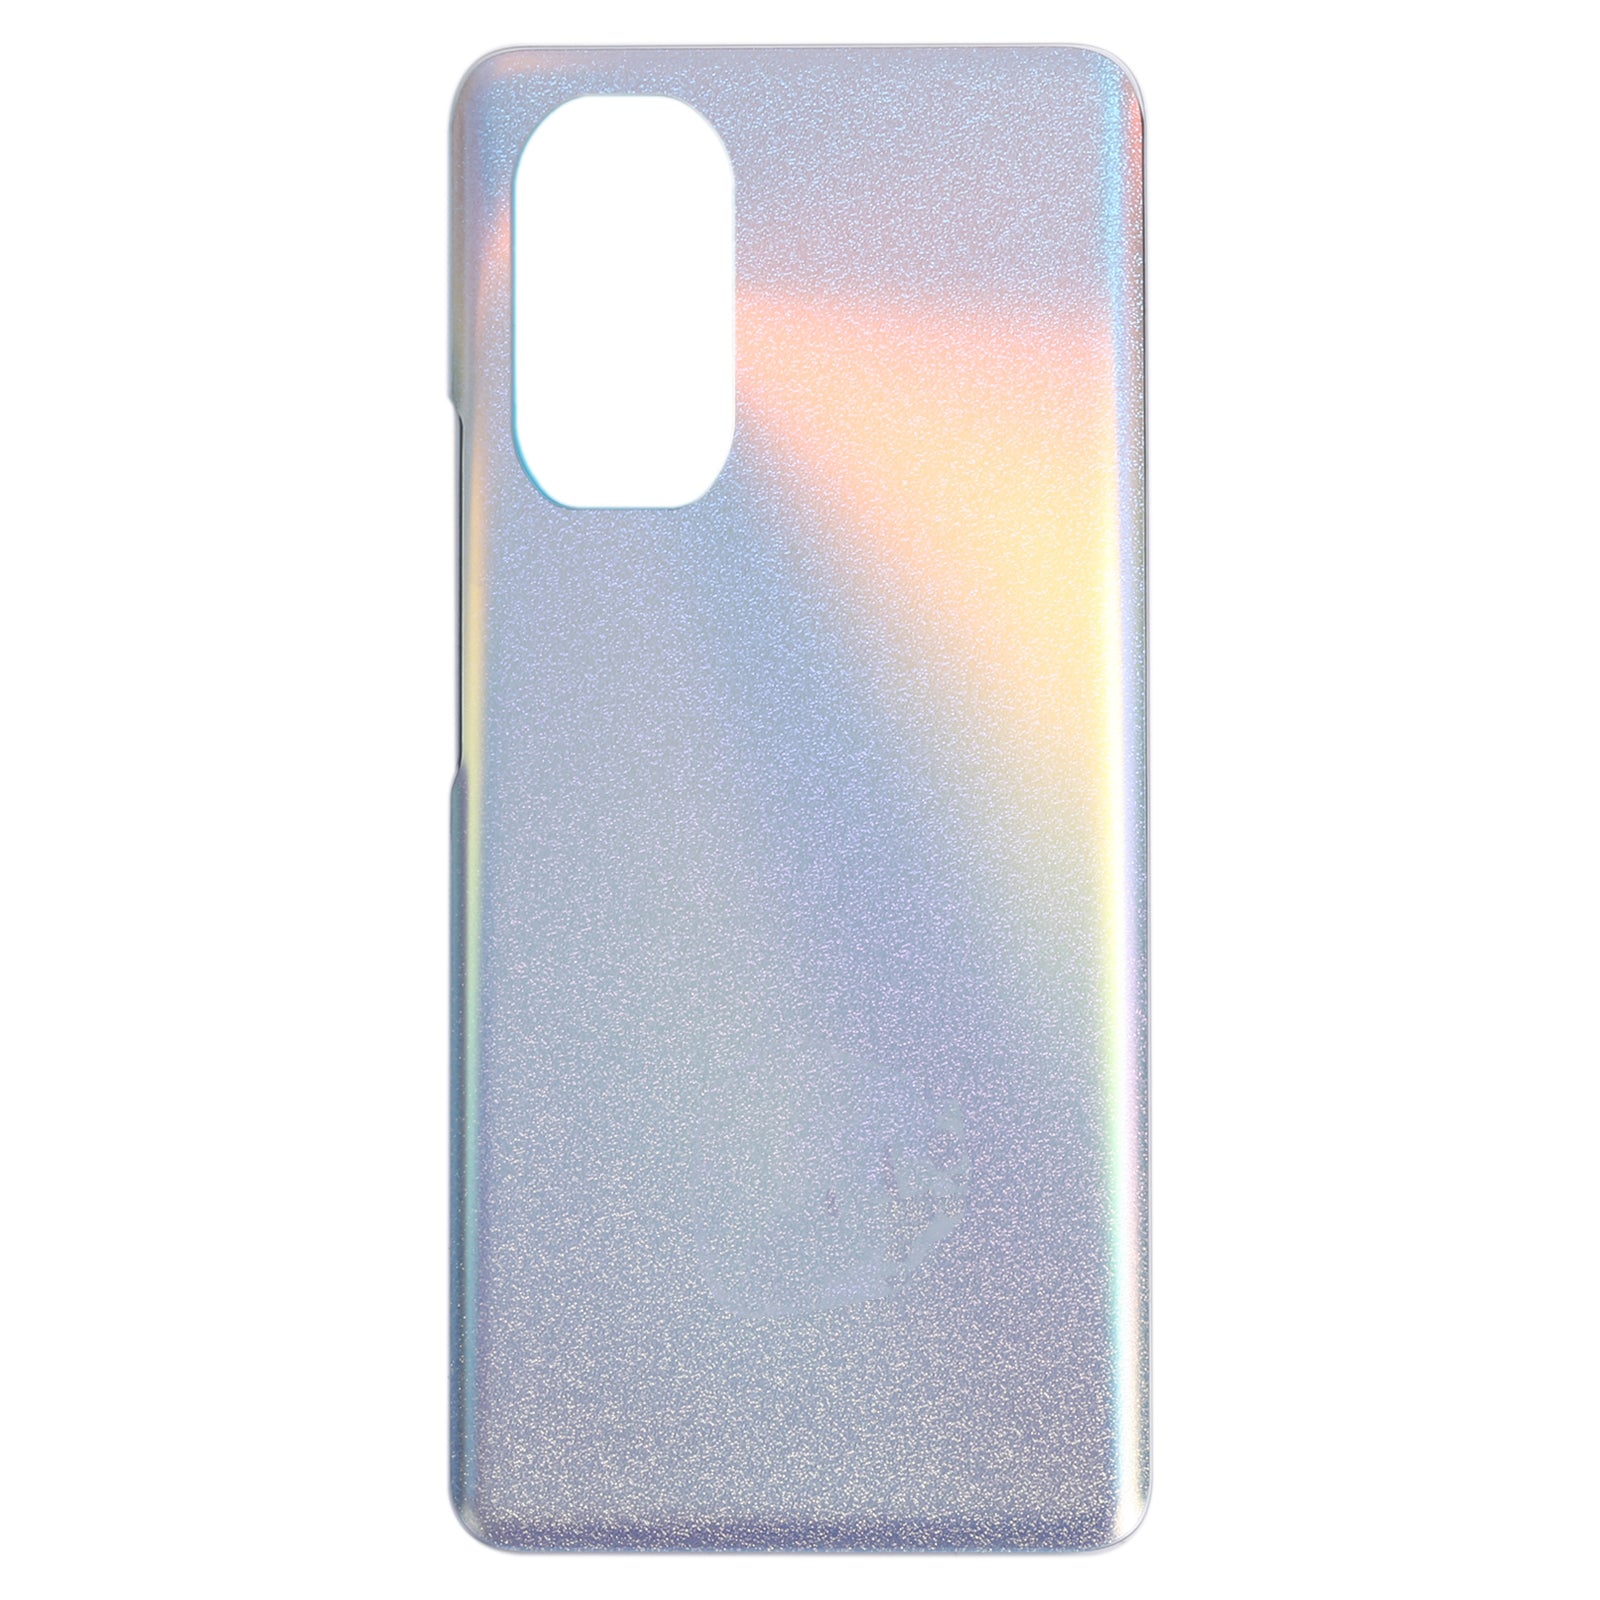 Replacement Rear Glass For Huawei Nova 9 Battery Cover With Adhesive - Silver